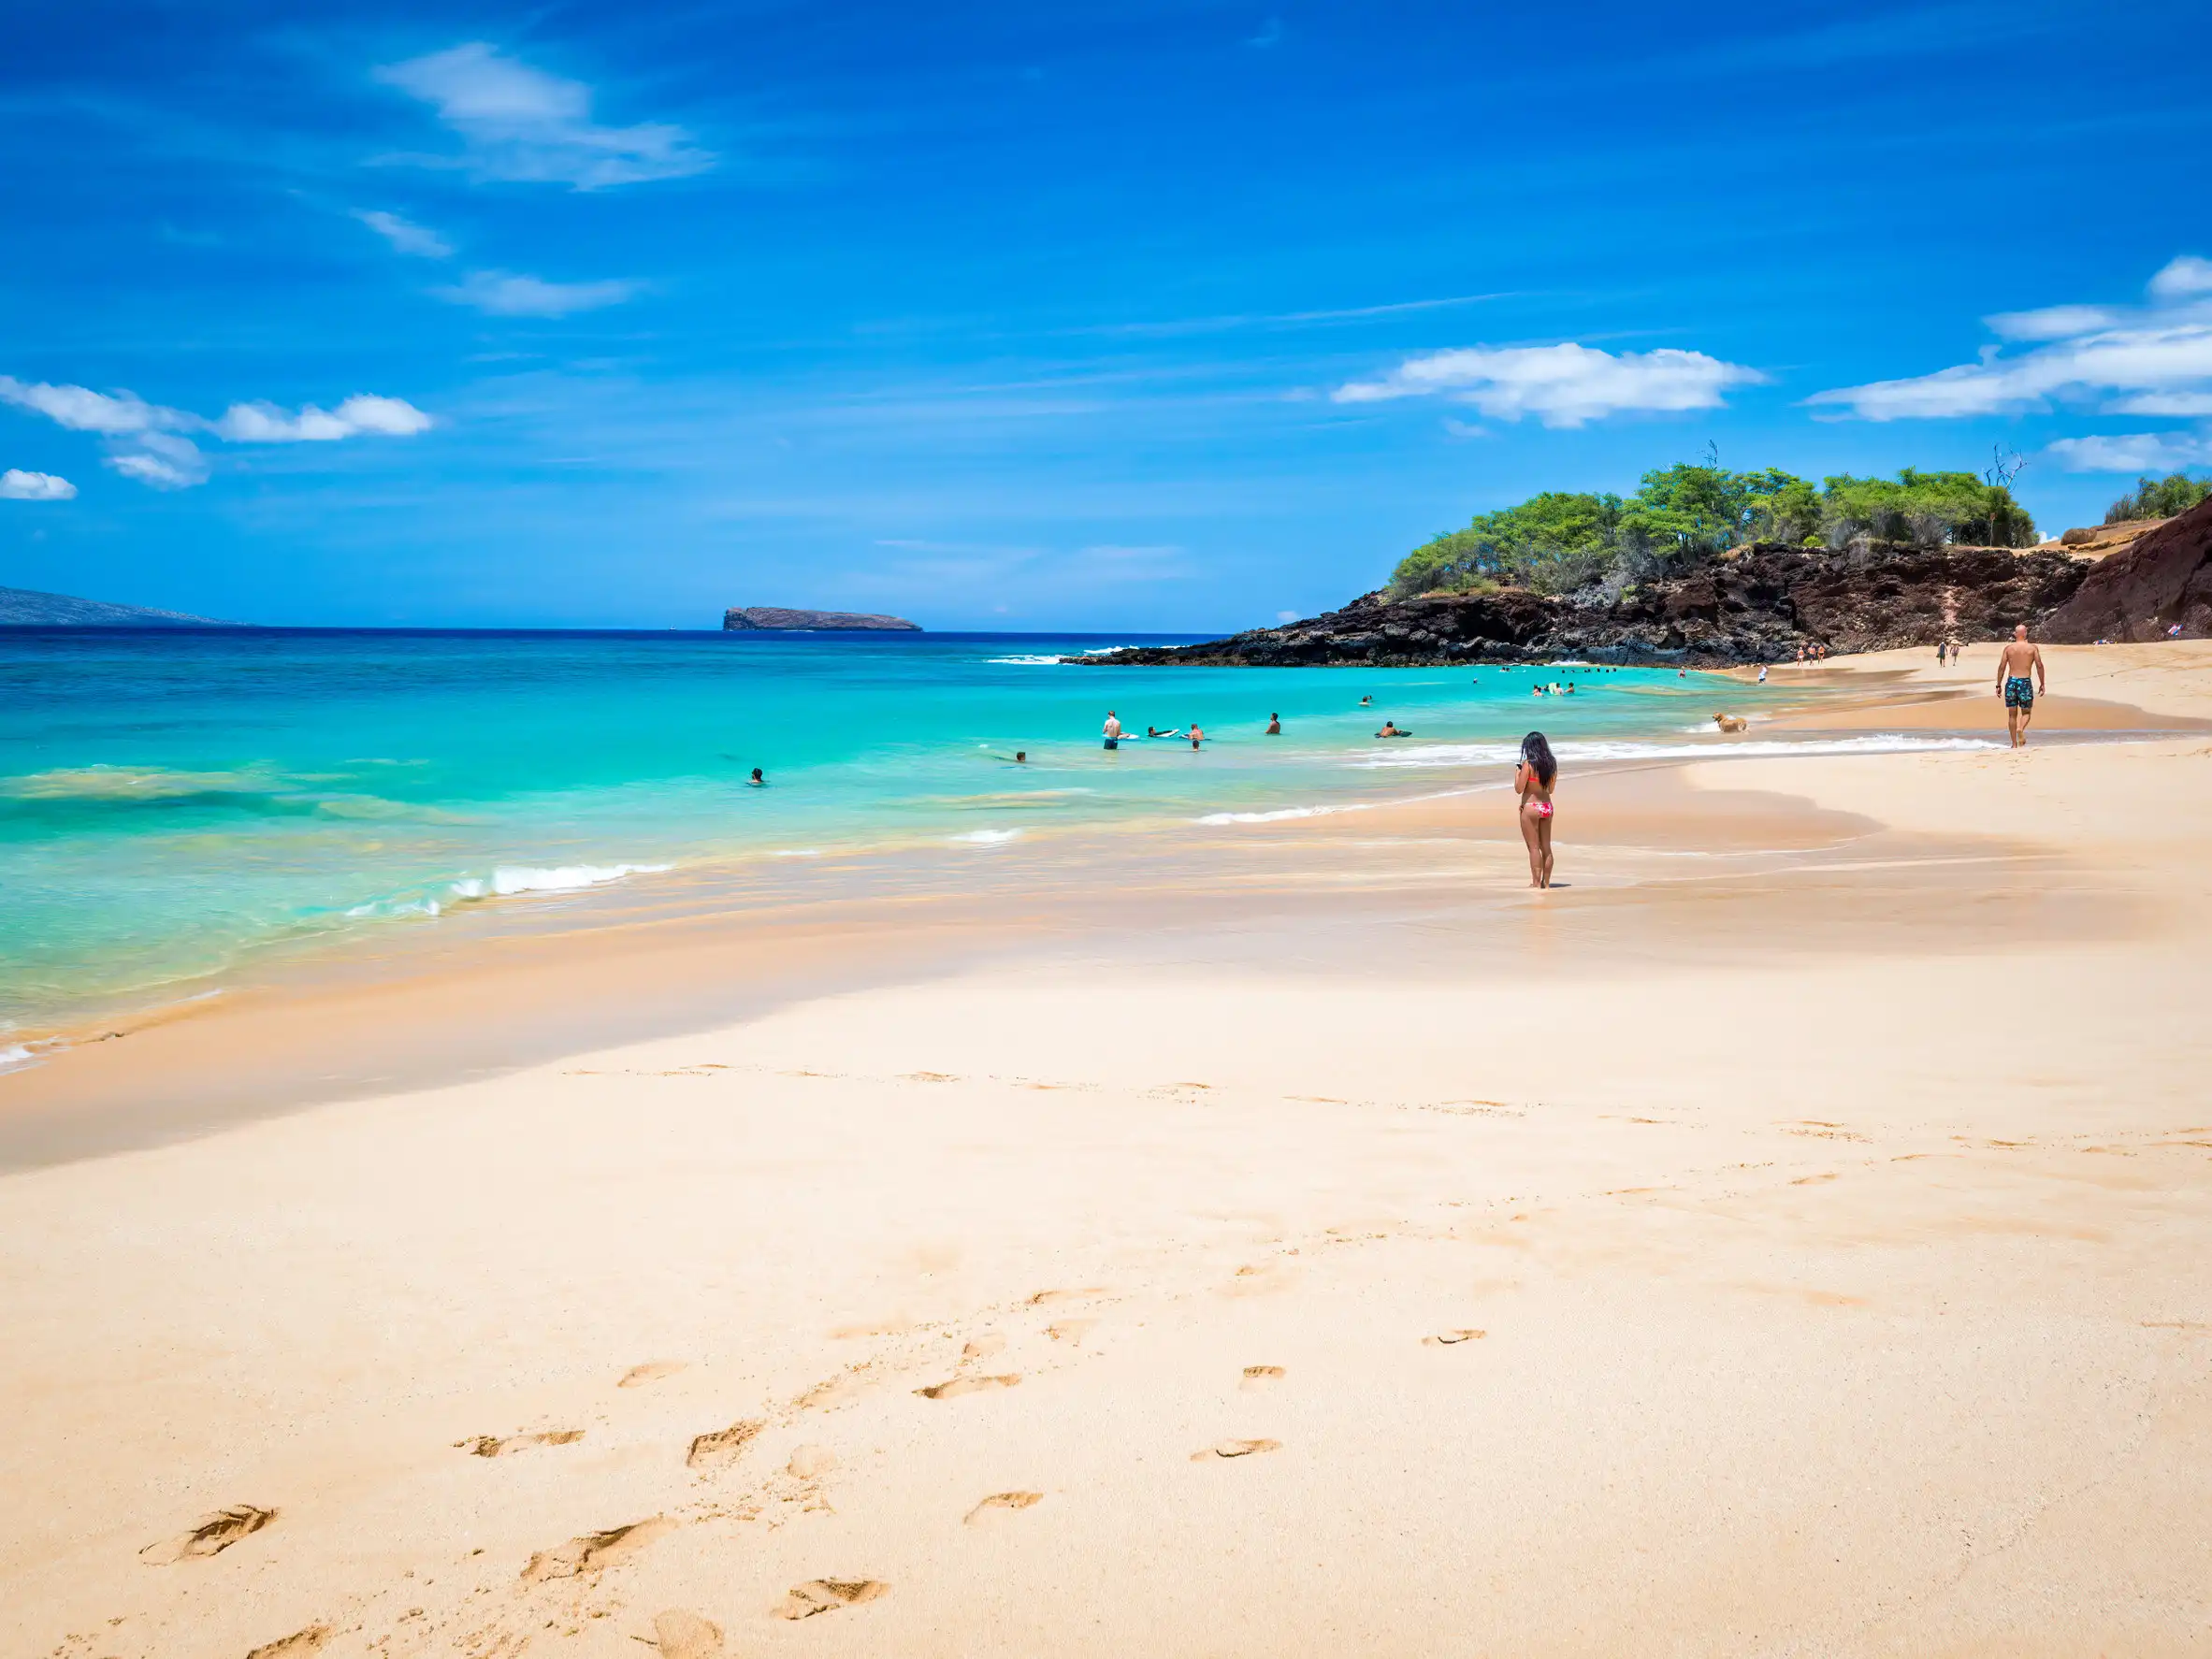 Top 8 Things You Need To Pack For A Perfect Maui Beach Day